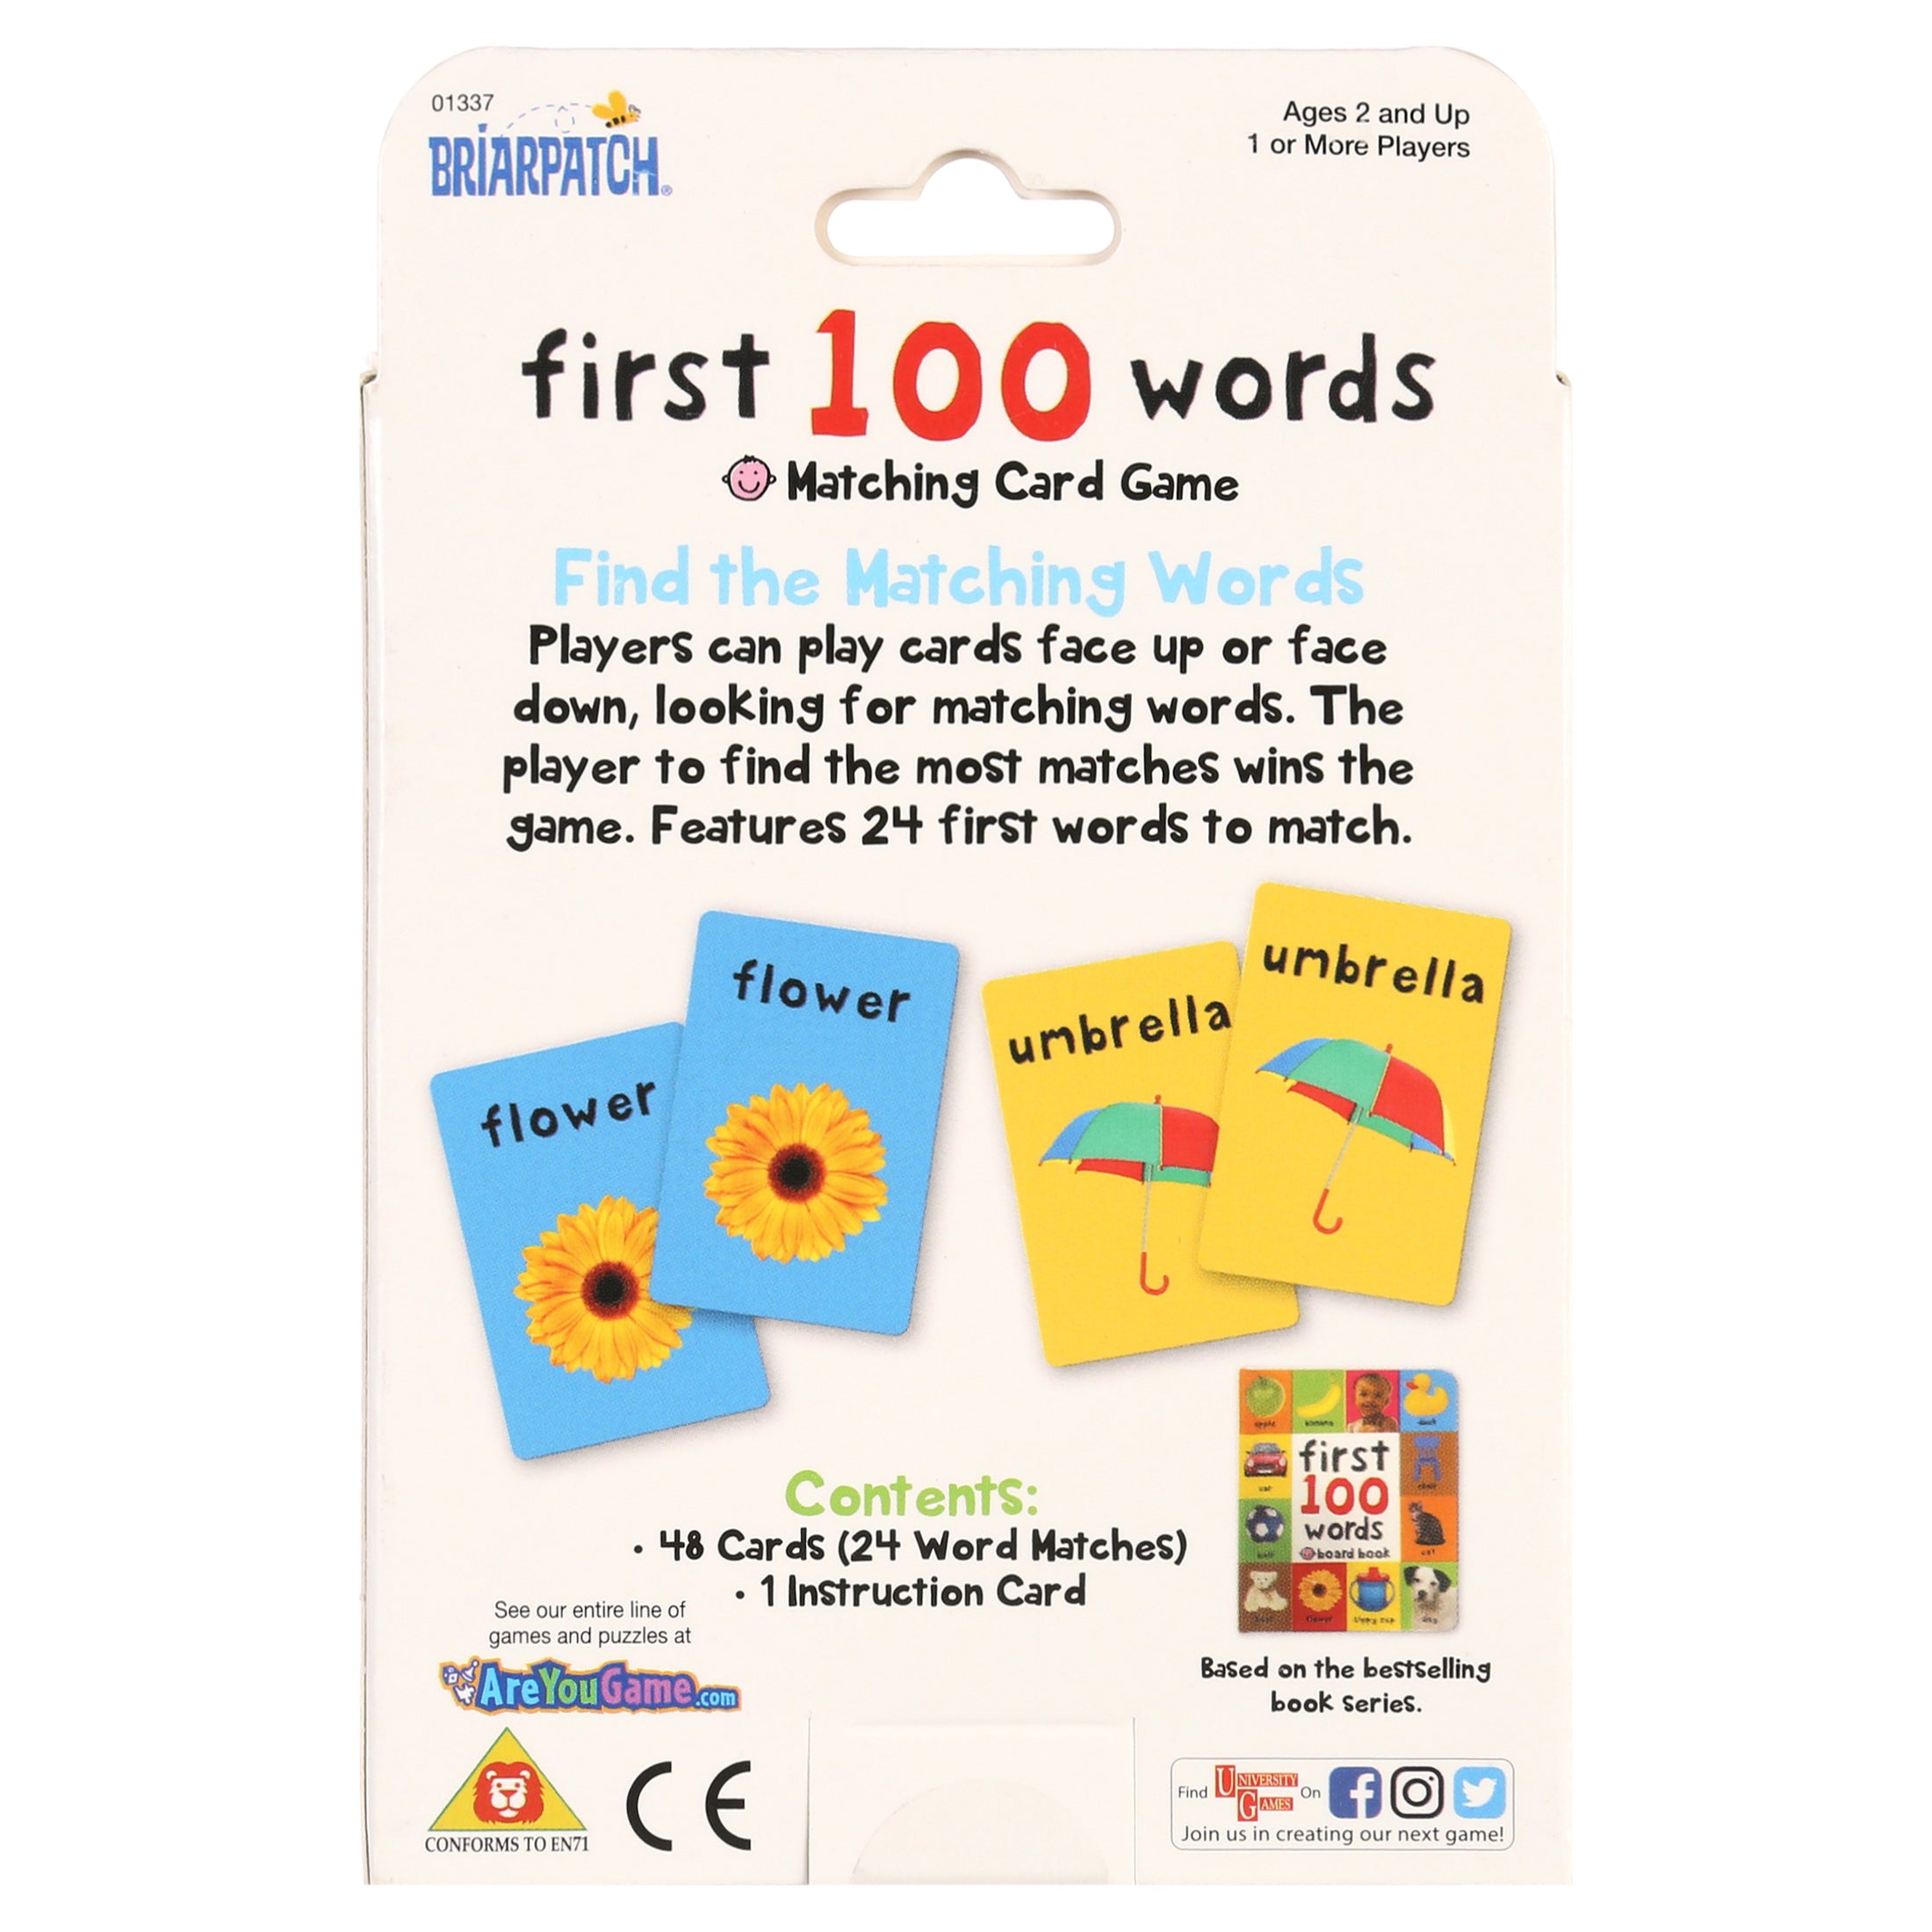 My First 100 WordsMatching Card Game